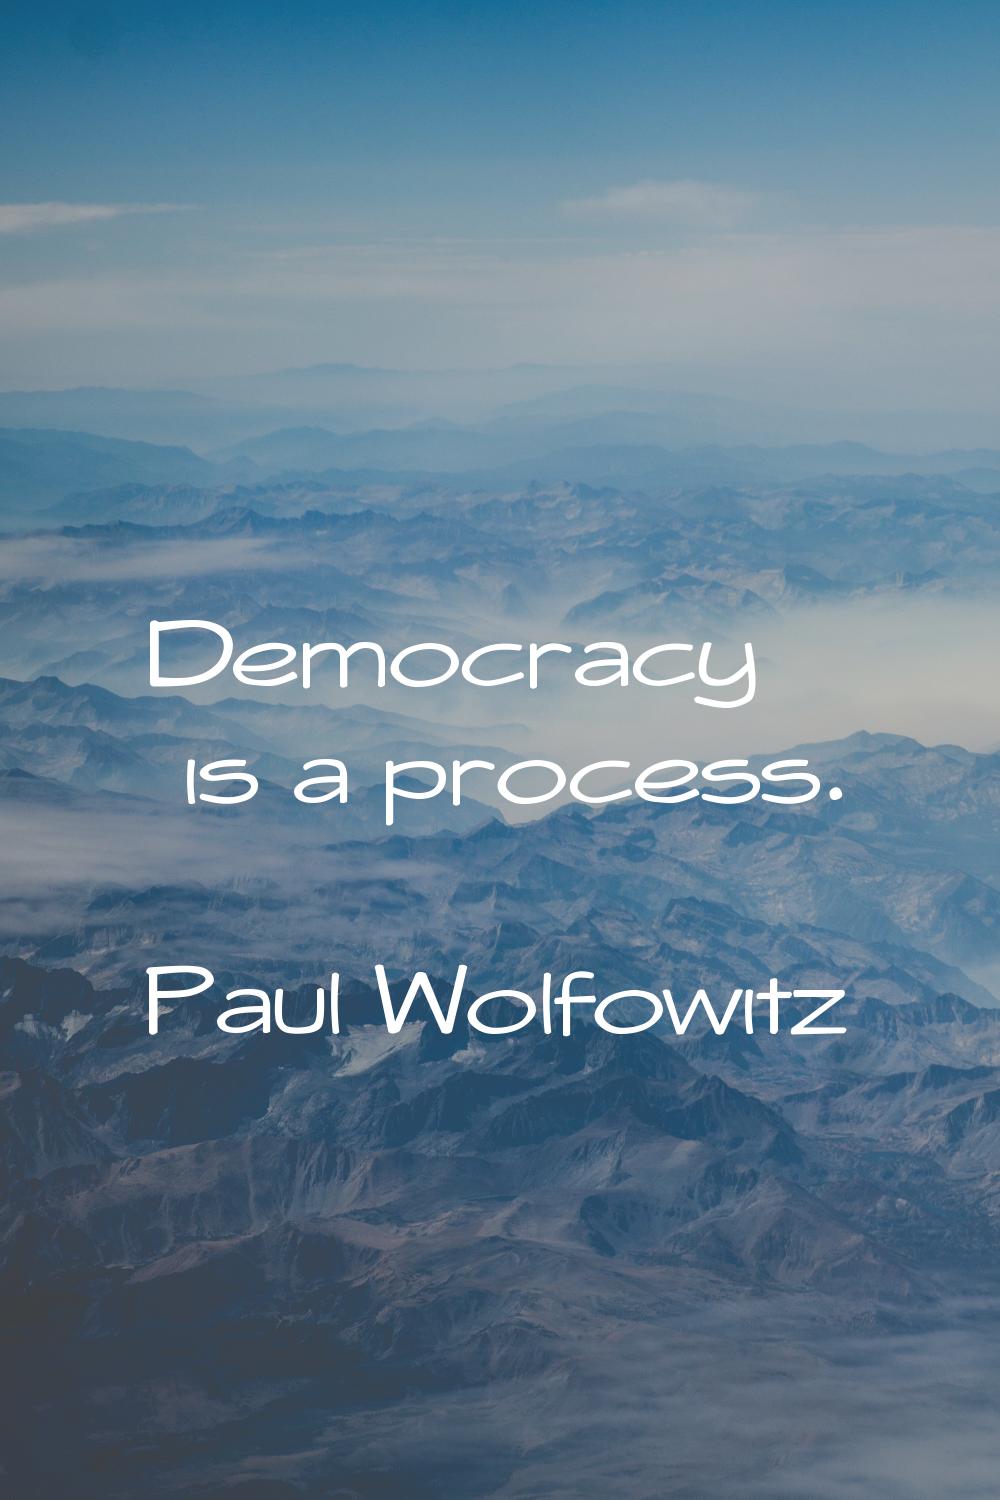 Democracy is a process.